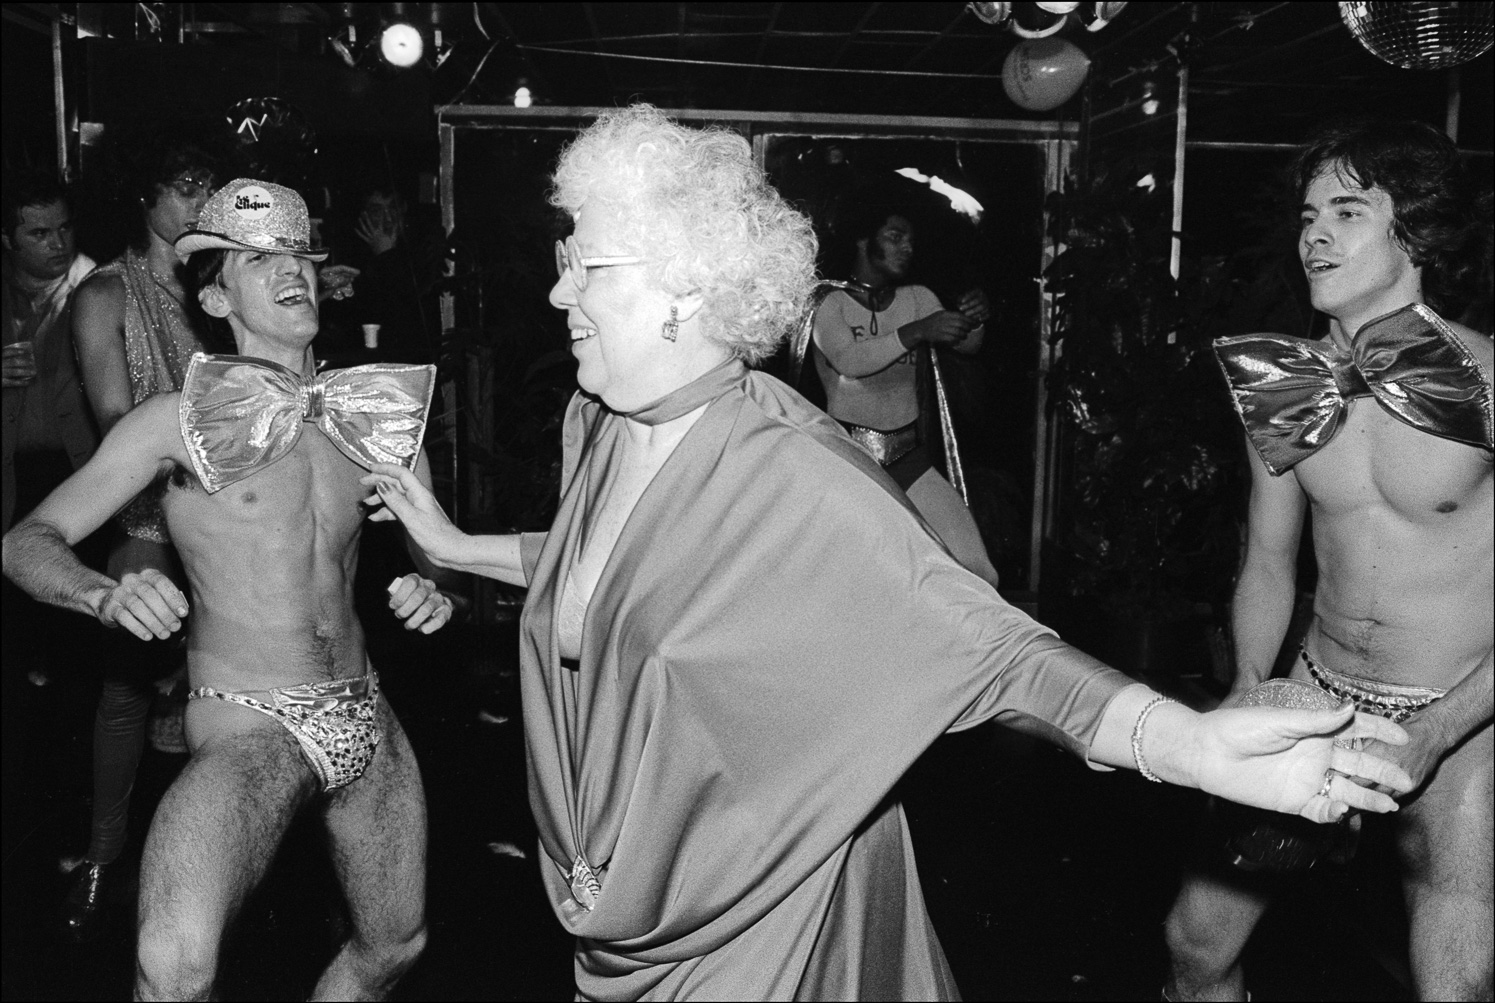 Nightlife - New York in the 70s - From Studio 54 to the Mudd Club and Beyon...